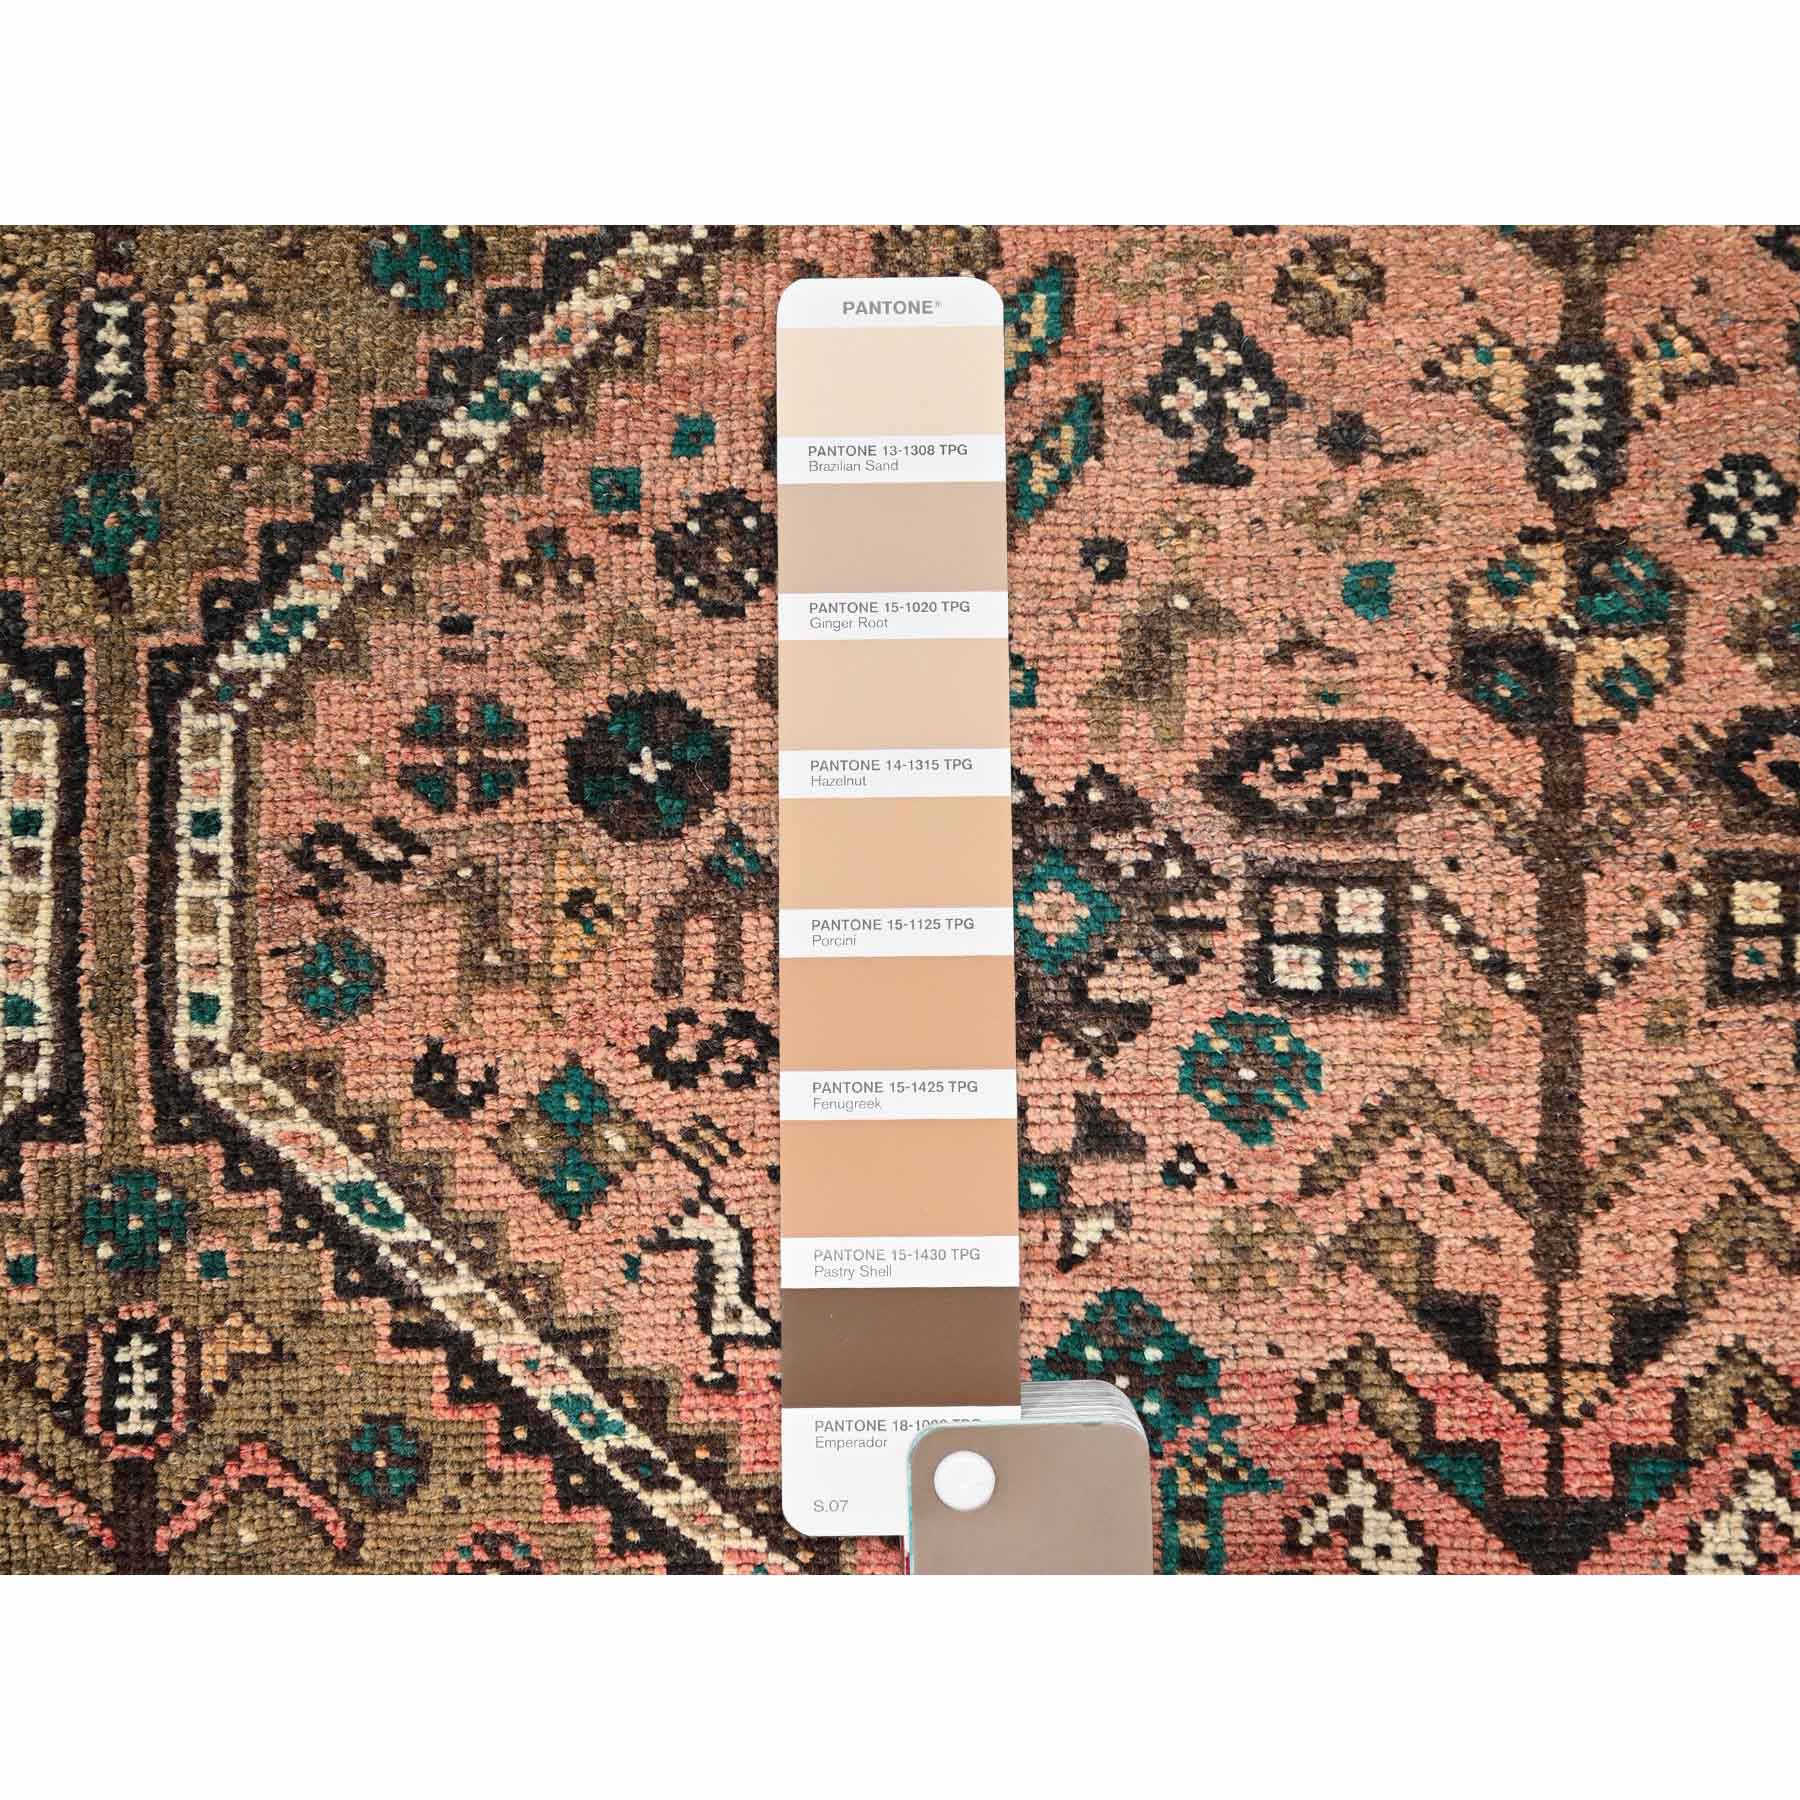 Overdyed-Vintage-Hand-Knotted-Rug-430335